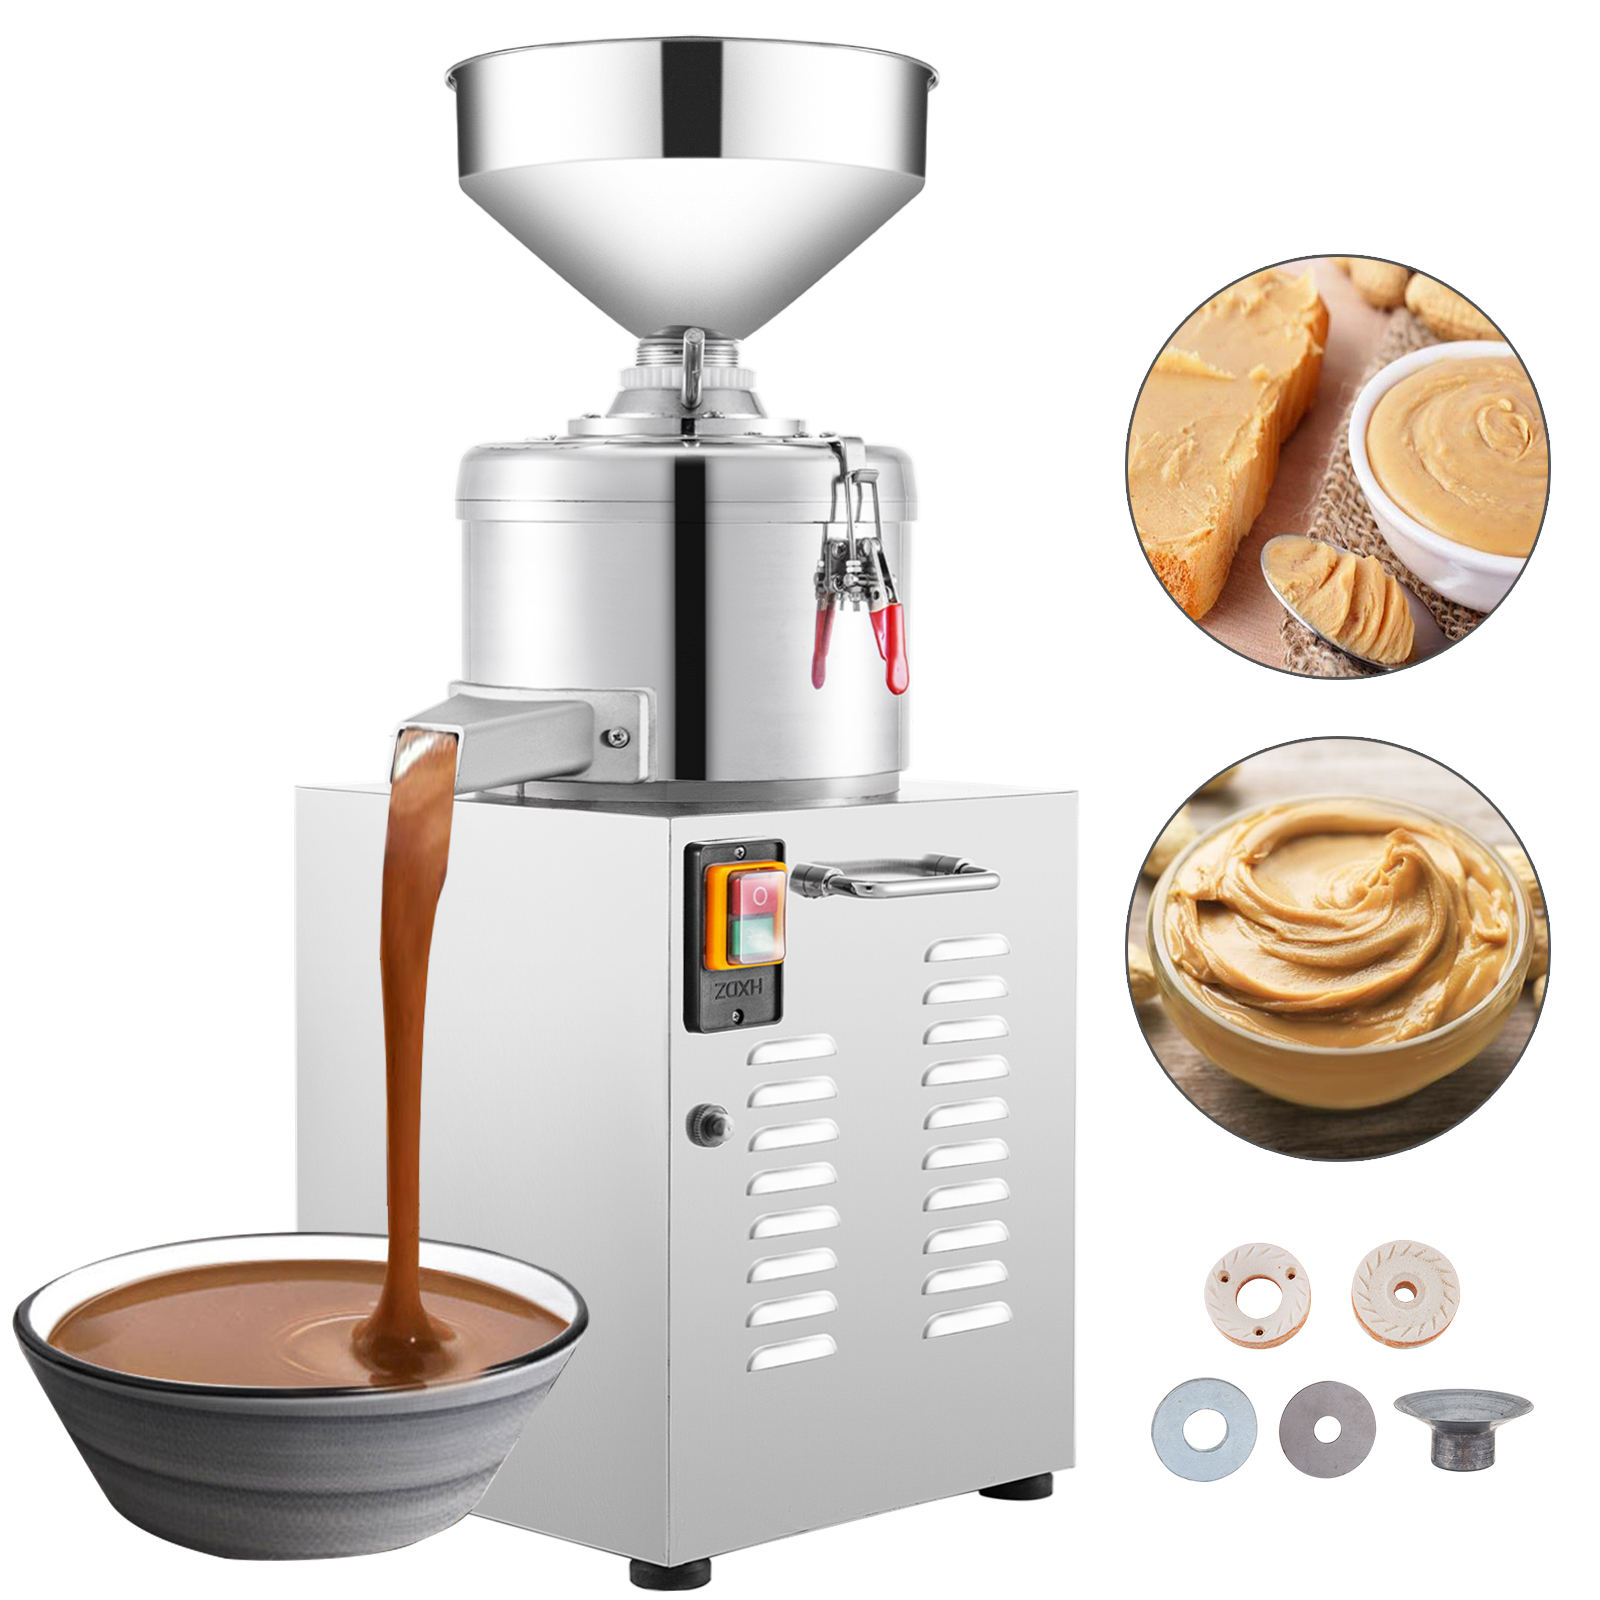 CG-160R Stainless steel automatic high-precision peanut butter grinding machine nutrient-rich cost-saving processing capacity 35kg/h - Grain Grinder - 2